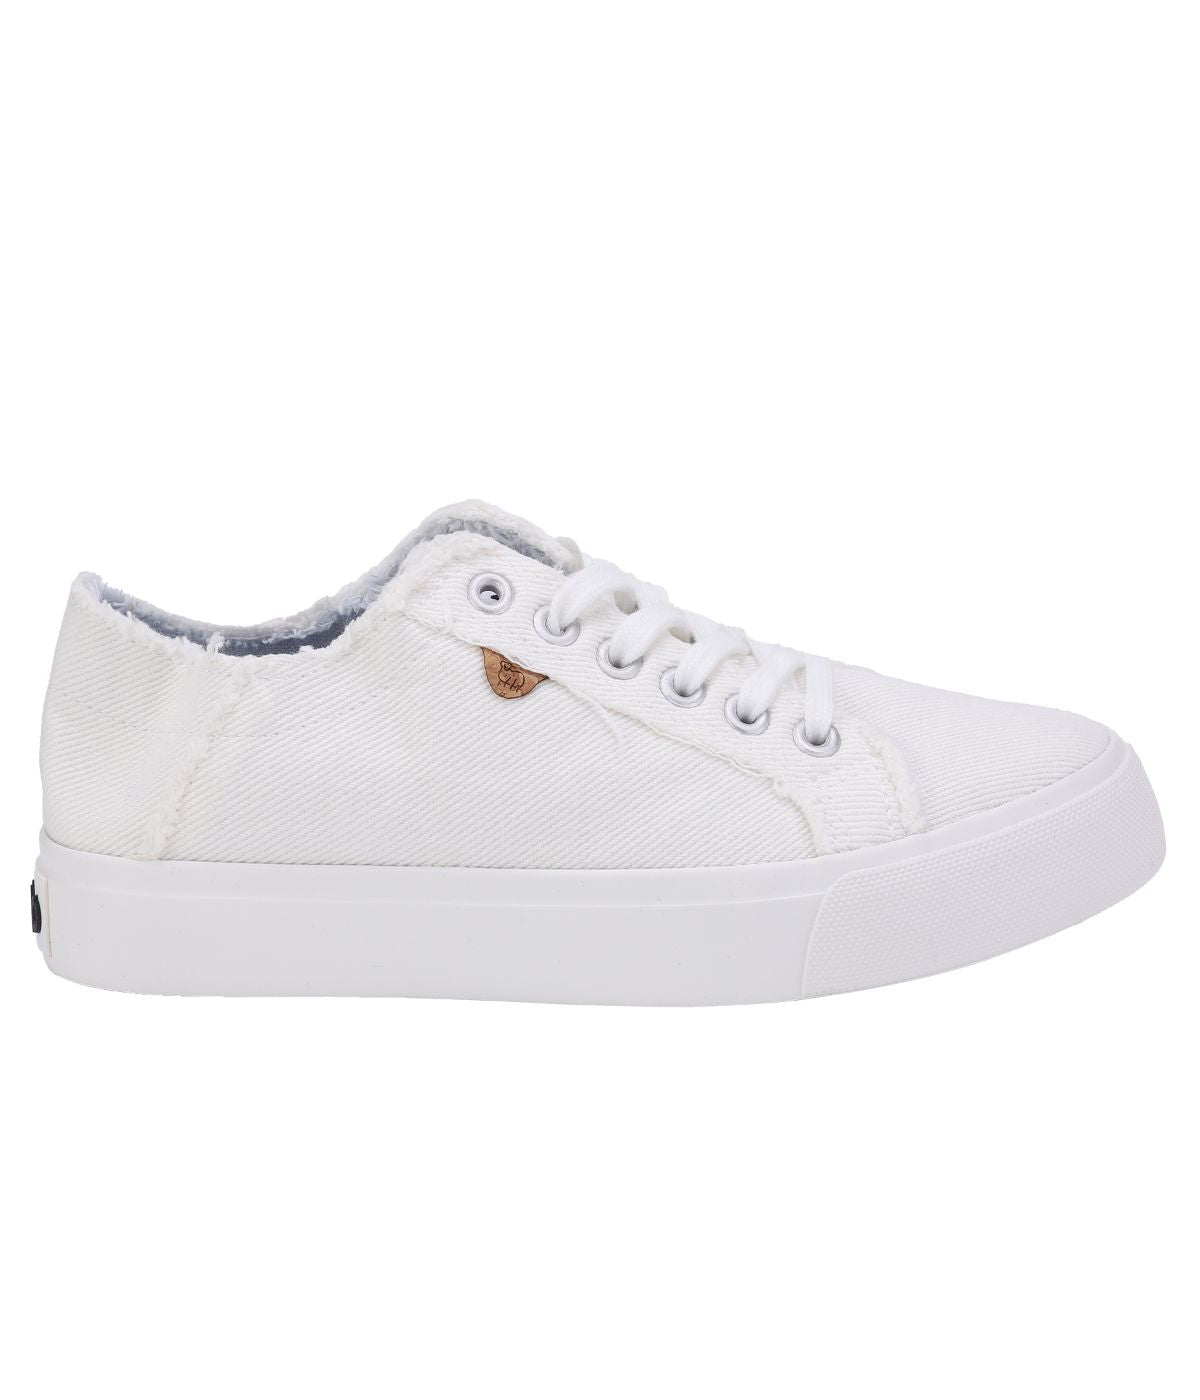 Ladies casual comfort shoe with washed twill or canvas upper Washed White